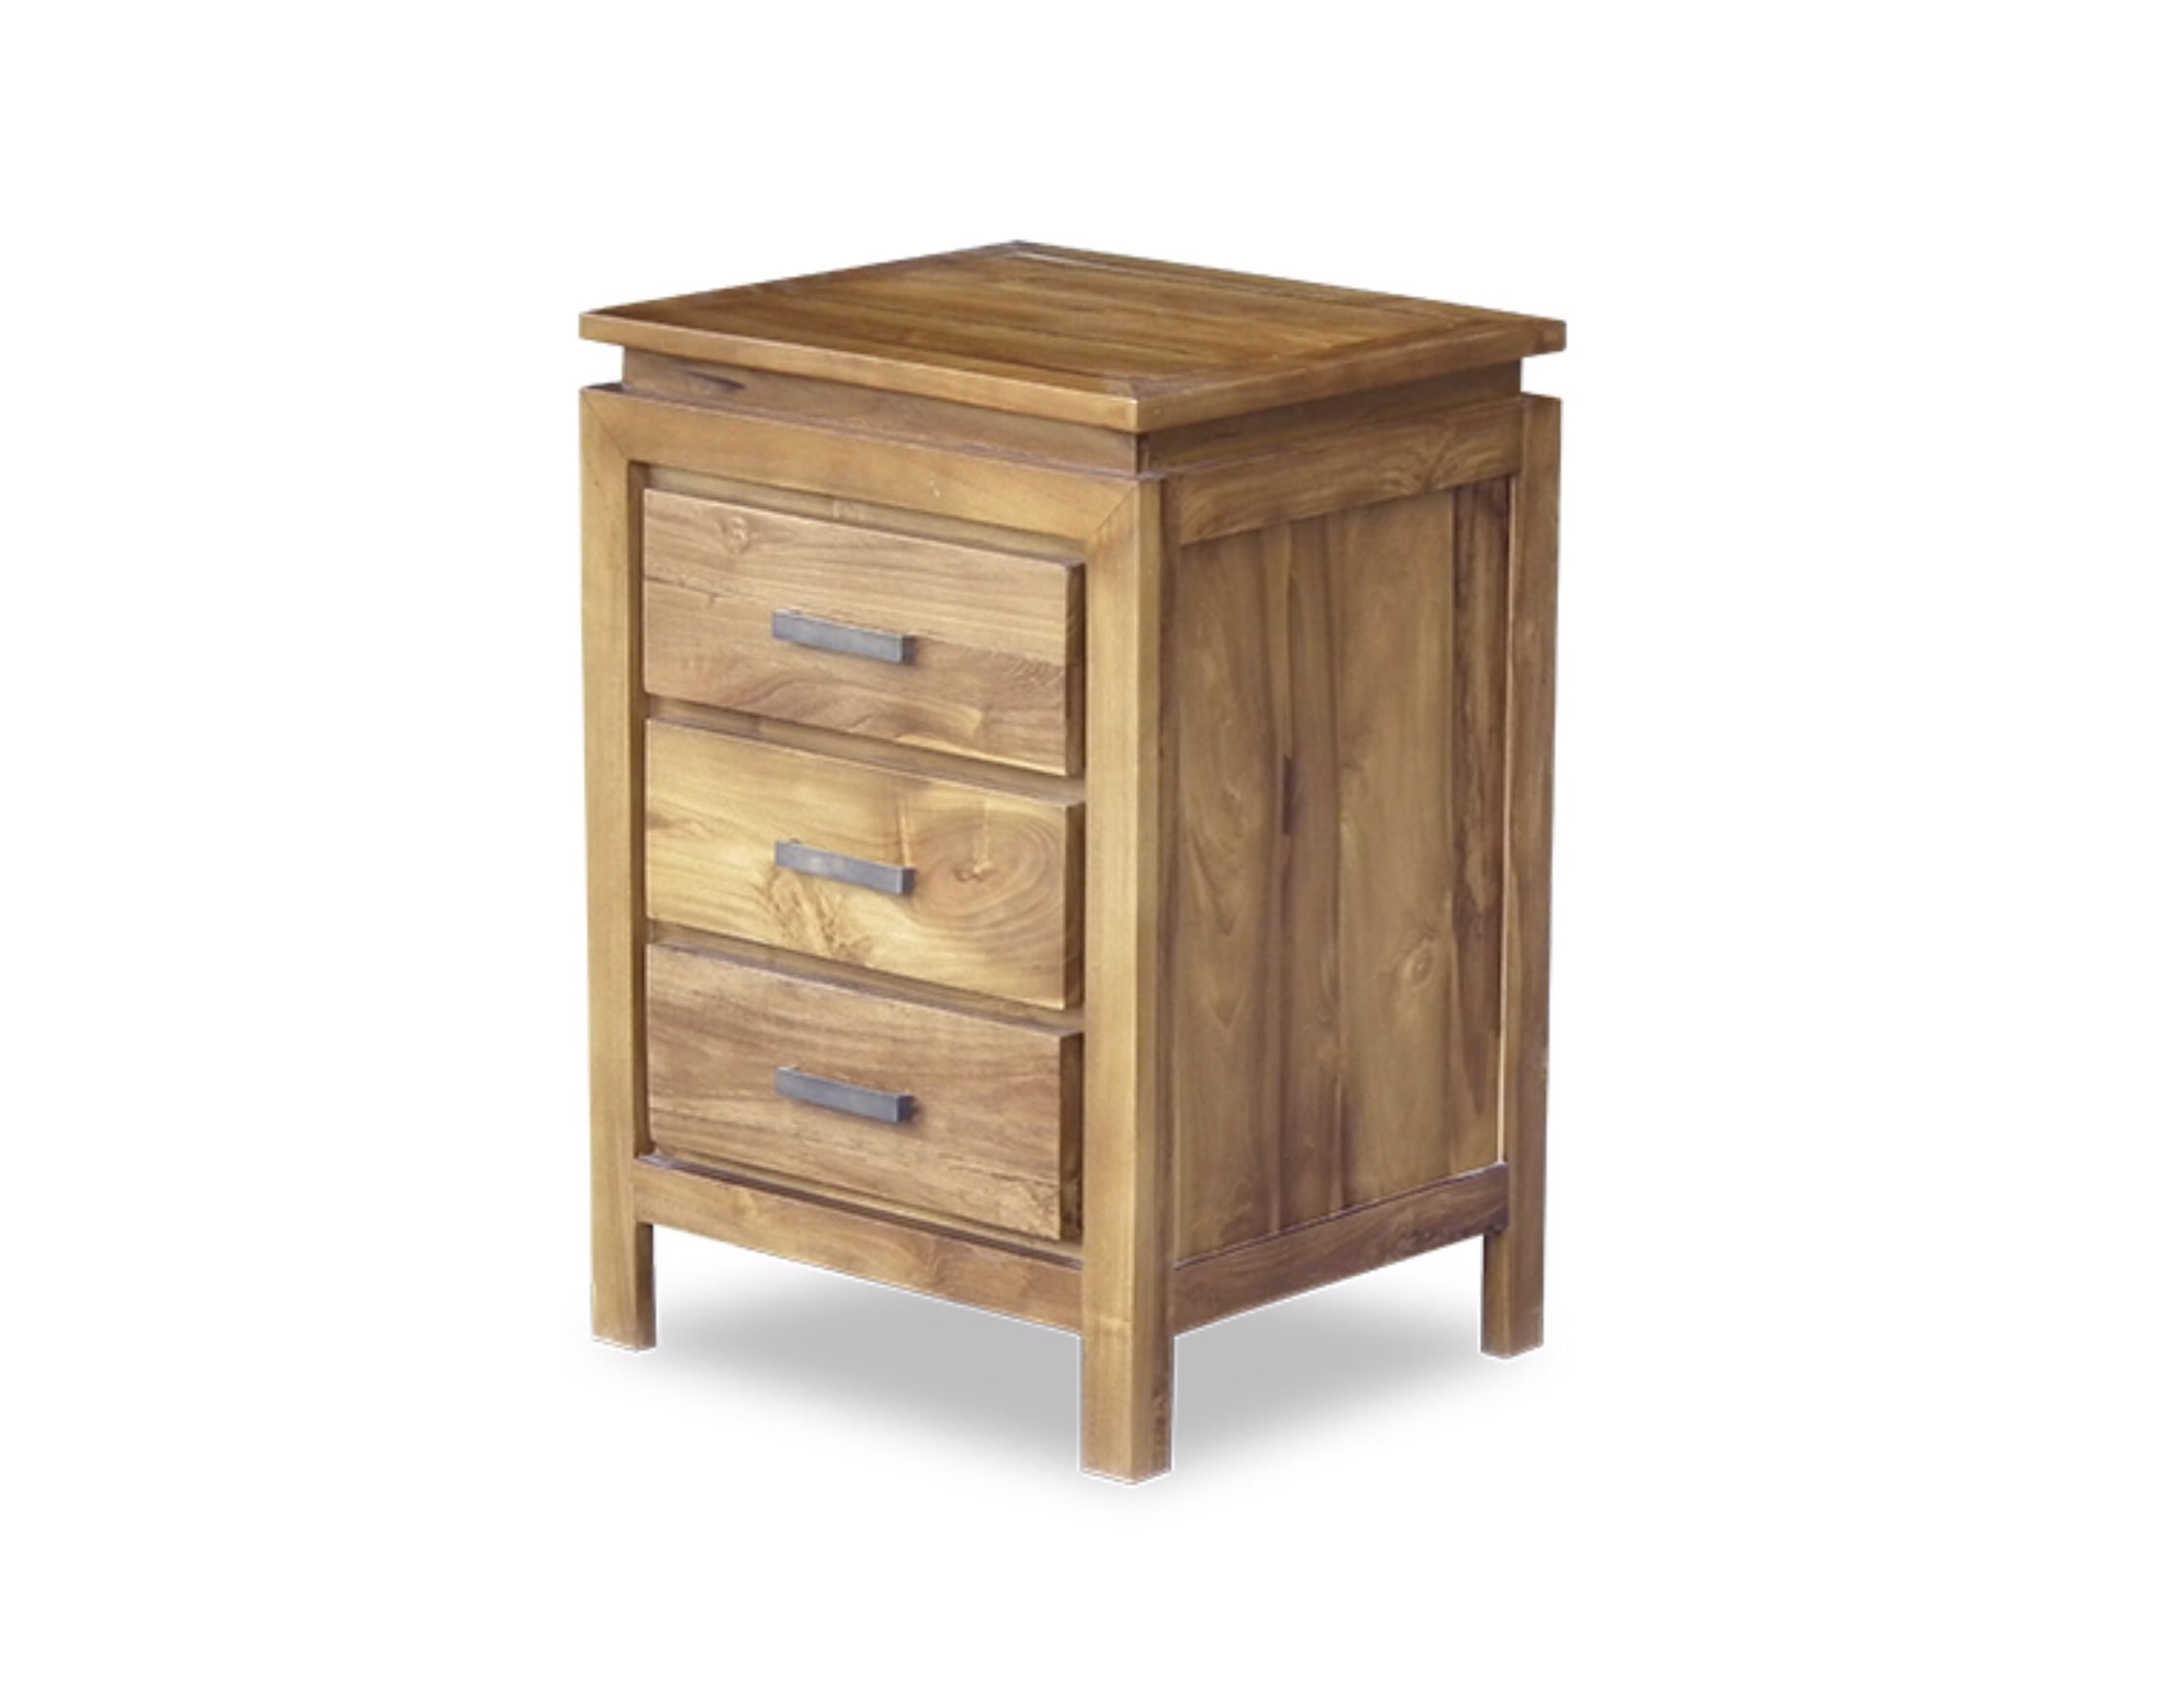 Made to Order Bedside Cabinets. - BSC 073-01